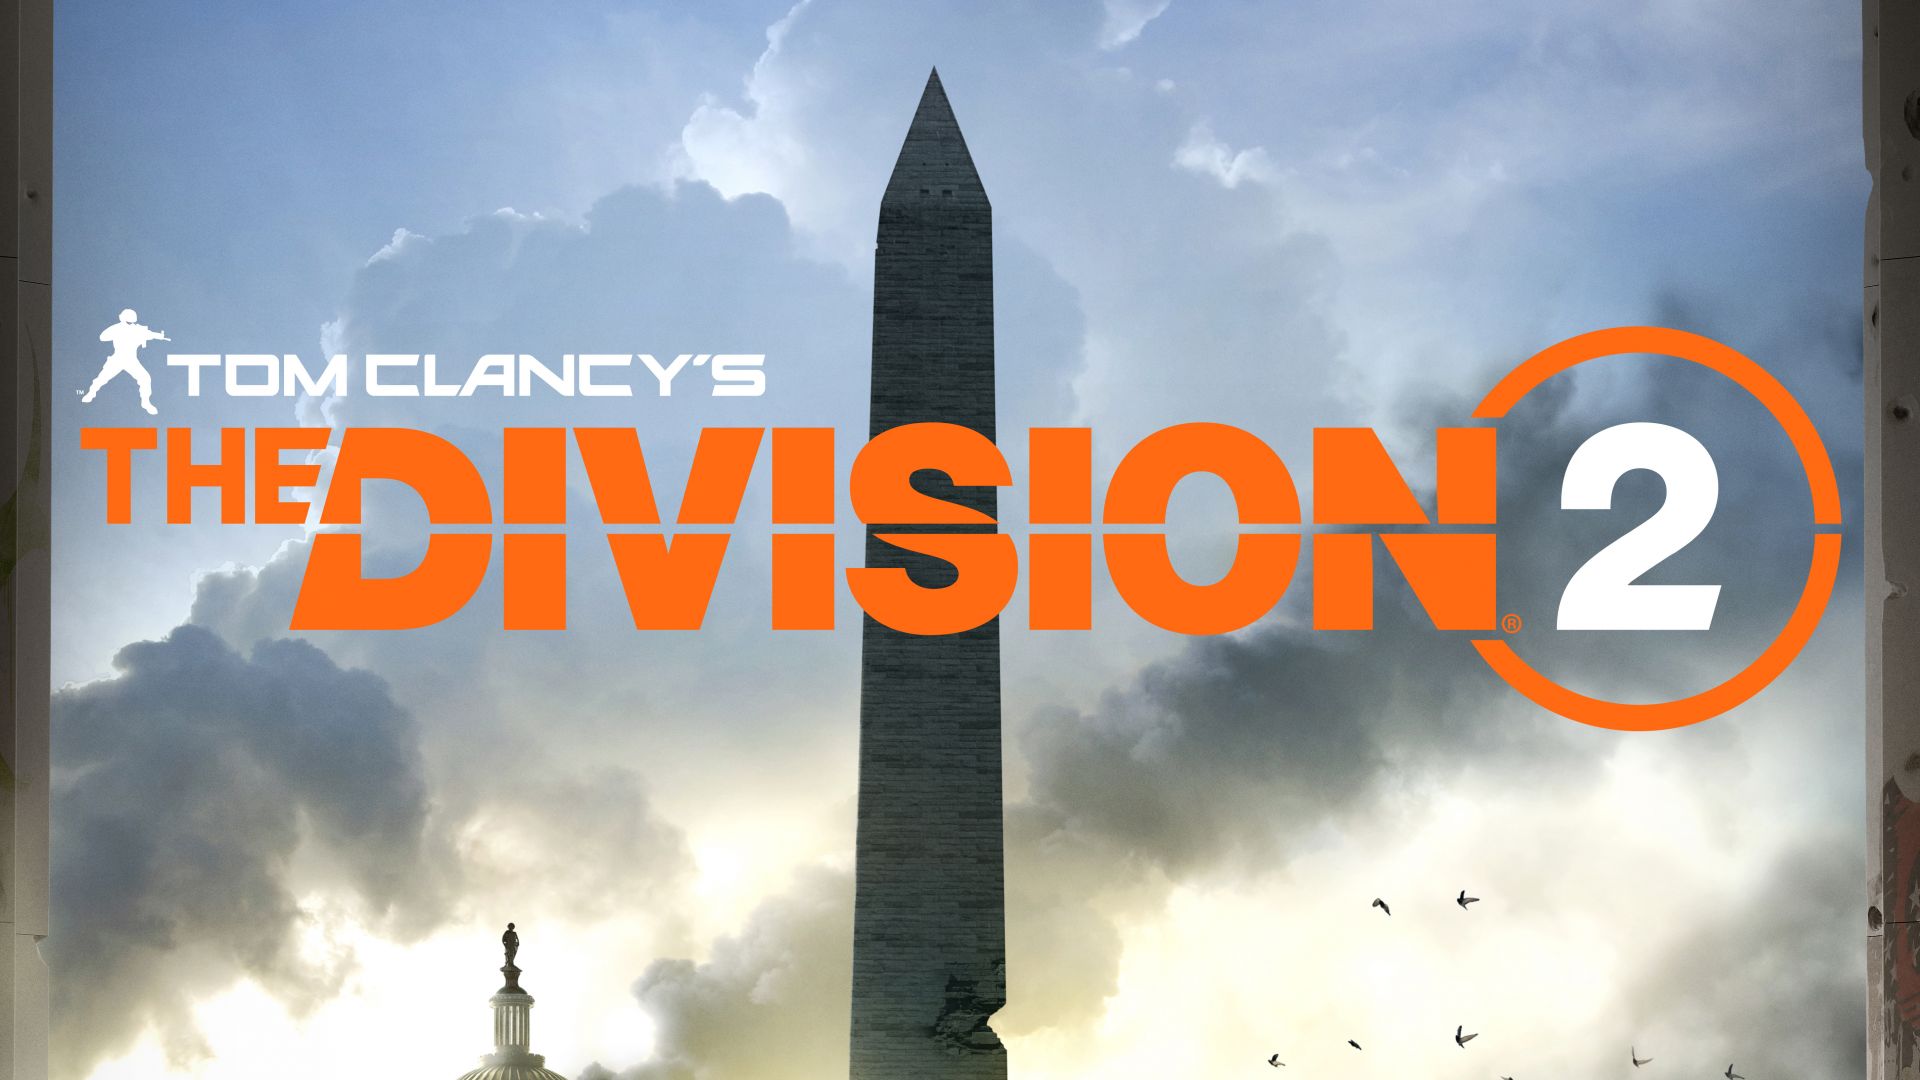 Wallpaper Tom Clancys The Division 2 E3 2018 Poster 4k Games 18995